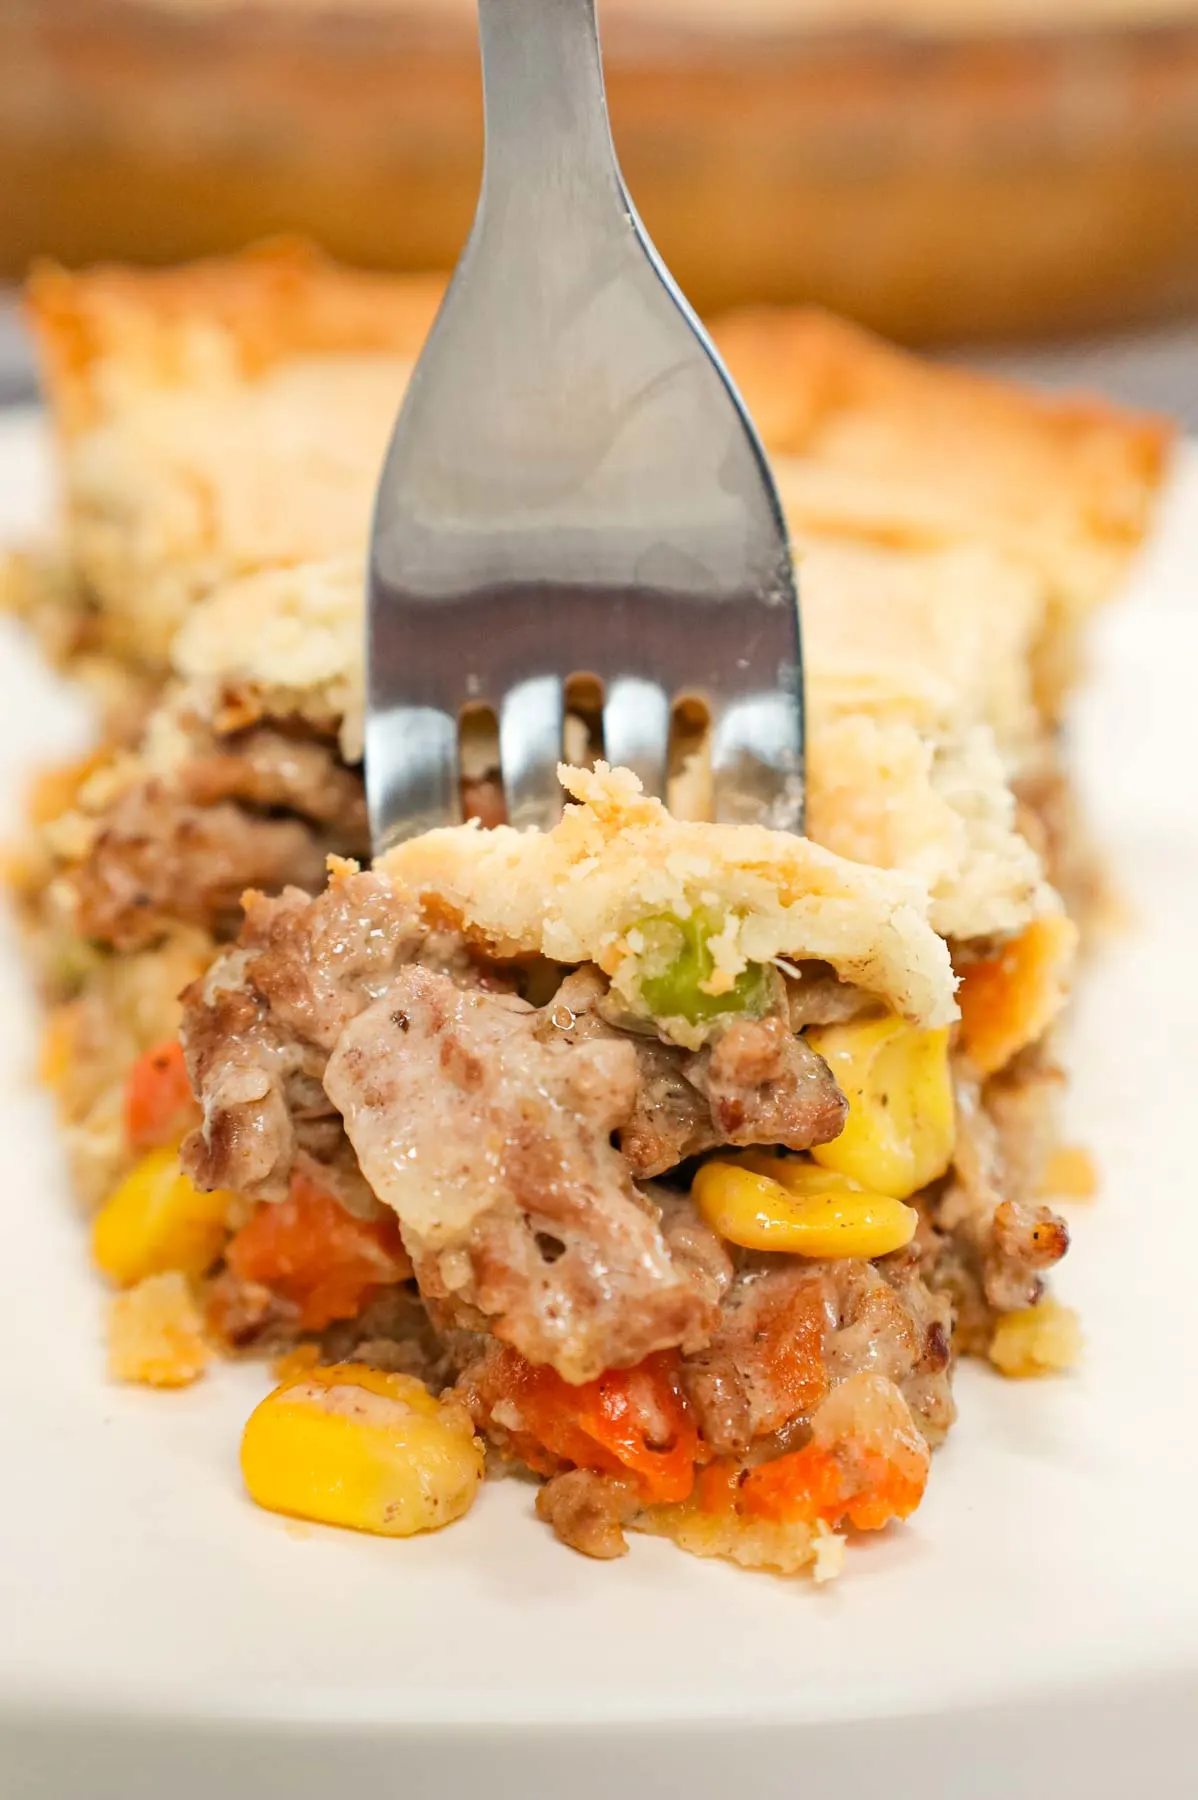 Ground Beef Pot Pie is an easy weeknight dinner recipe made with store bought pie crust and filled with ground beef and mixed vegetables all tossed in cream of mushroom soup.